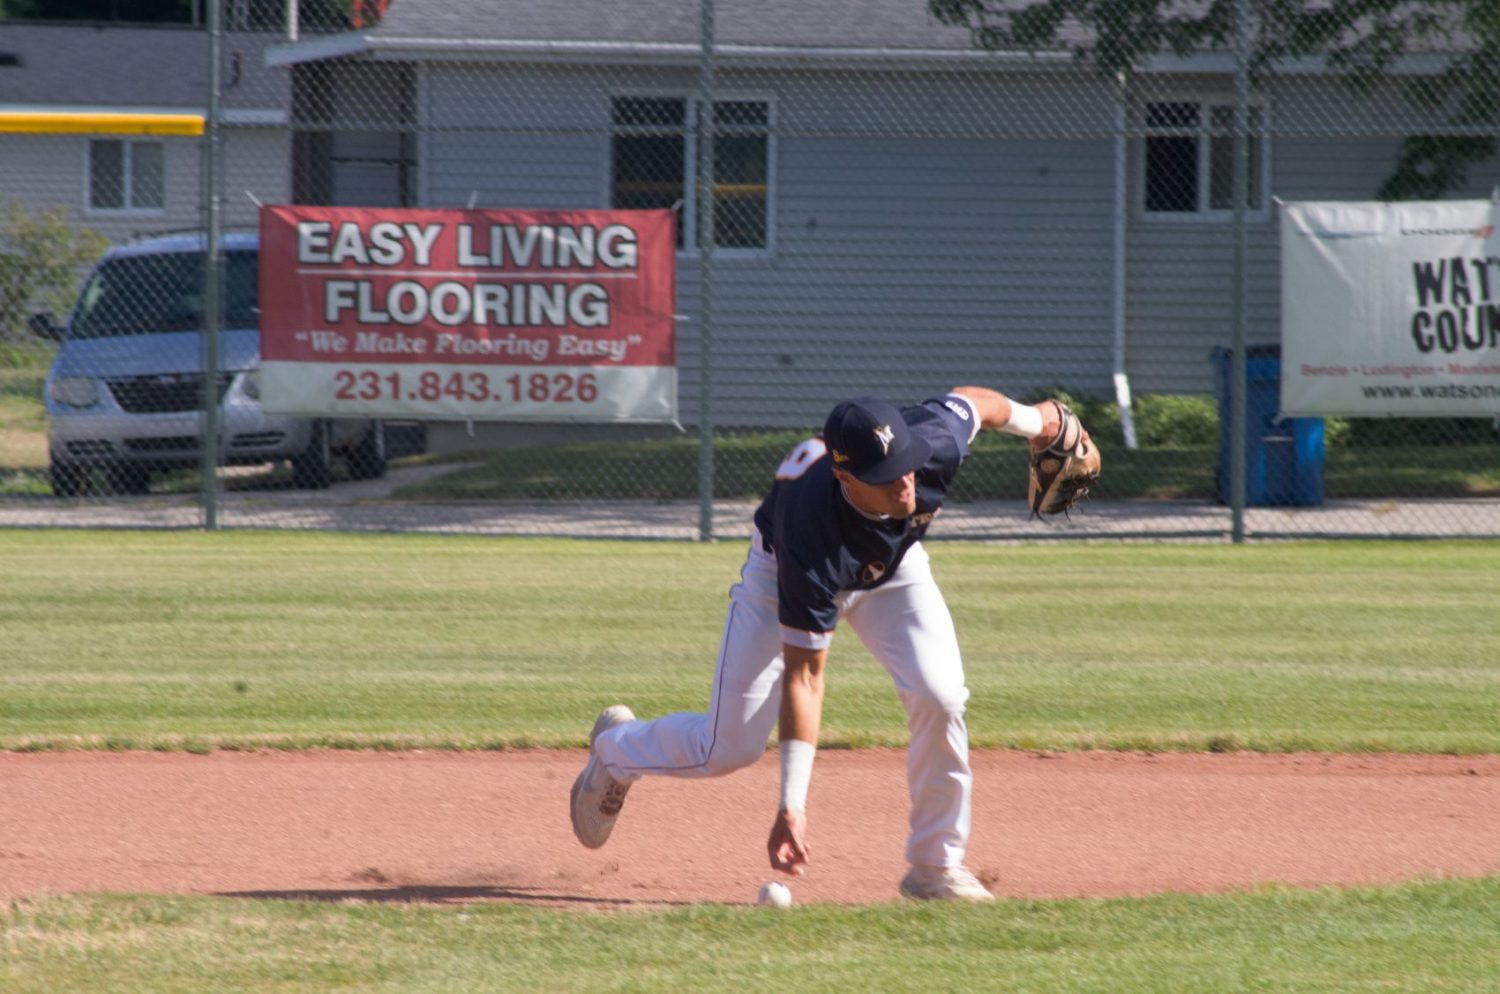 Manistee Saints win one of four games on opening weekend in Illinois